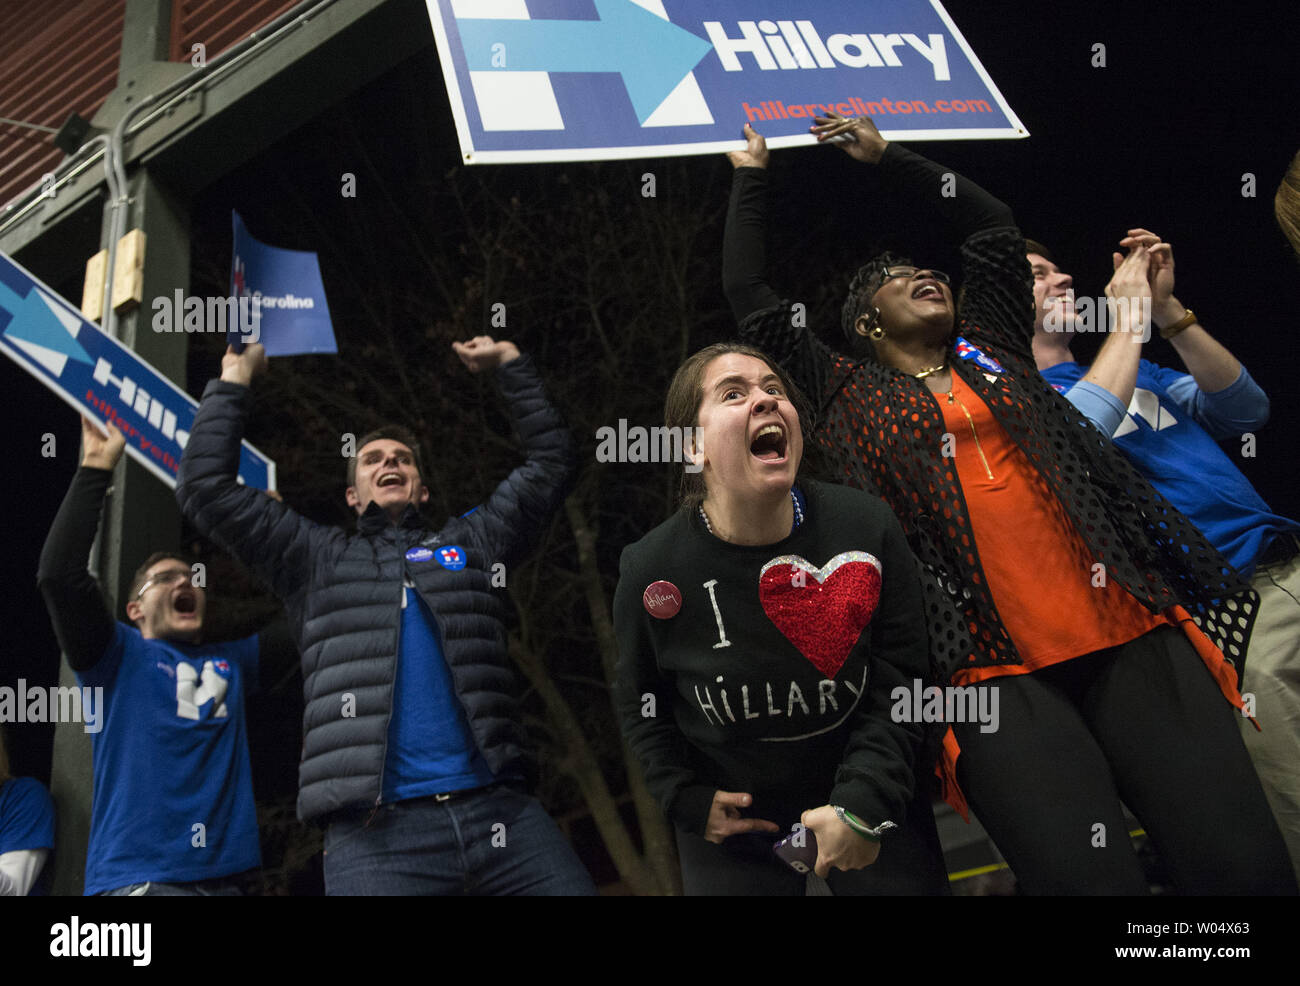 Hillary Clinton supporters cheer as Democratic presidential candidate Hillary Clinton speaks at the James Clyburn Fish Fry in Charleston, South Carolina on January 17, 2106. Photo by Kevin Dietsch/UPI Stock Photo